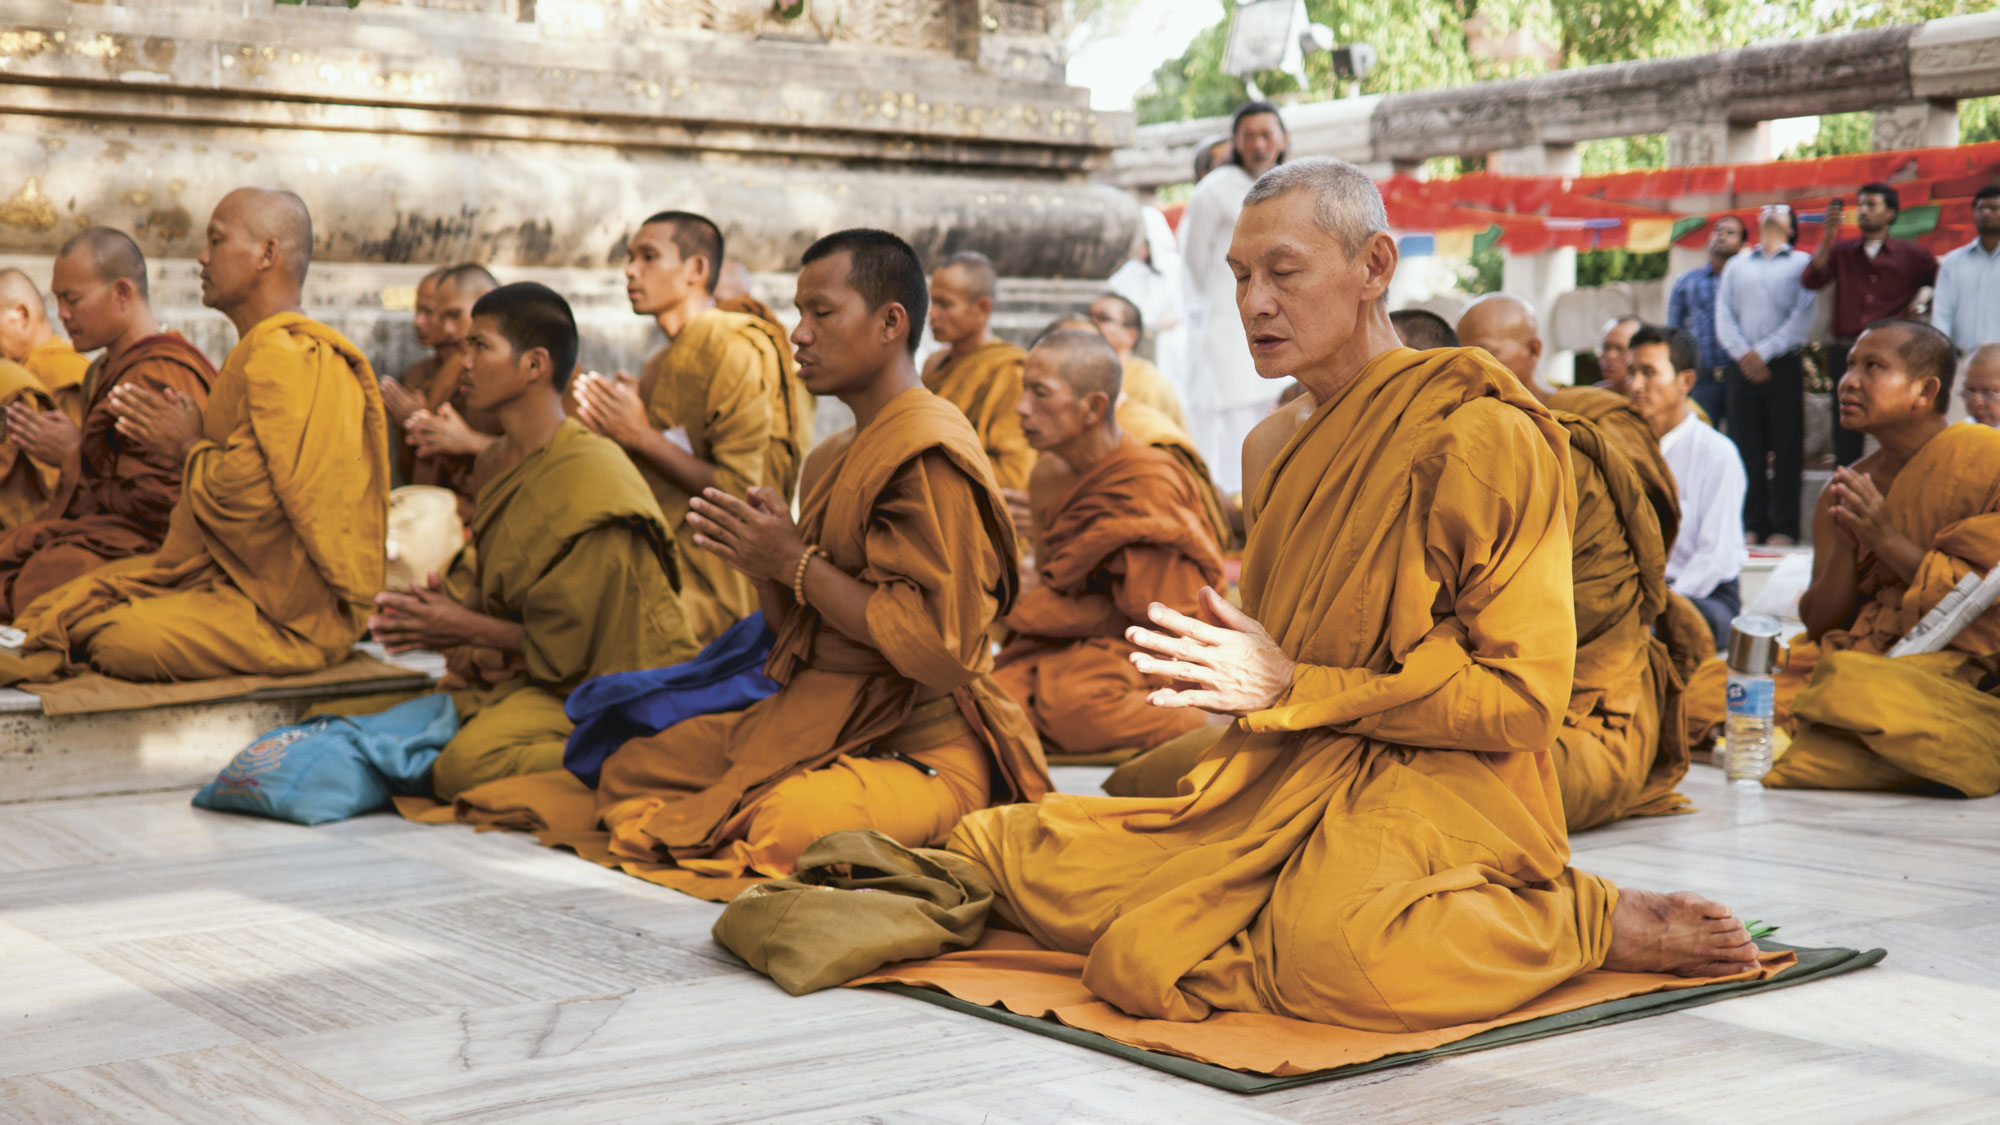 Monks at prayer in Mahabodhi Temple Complex